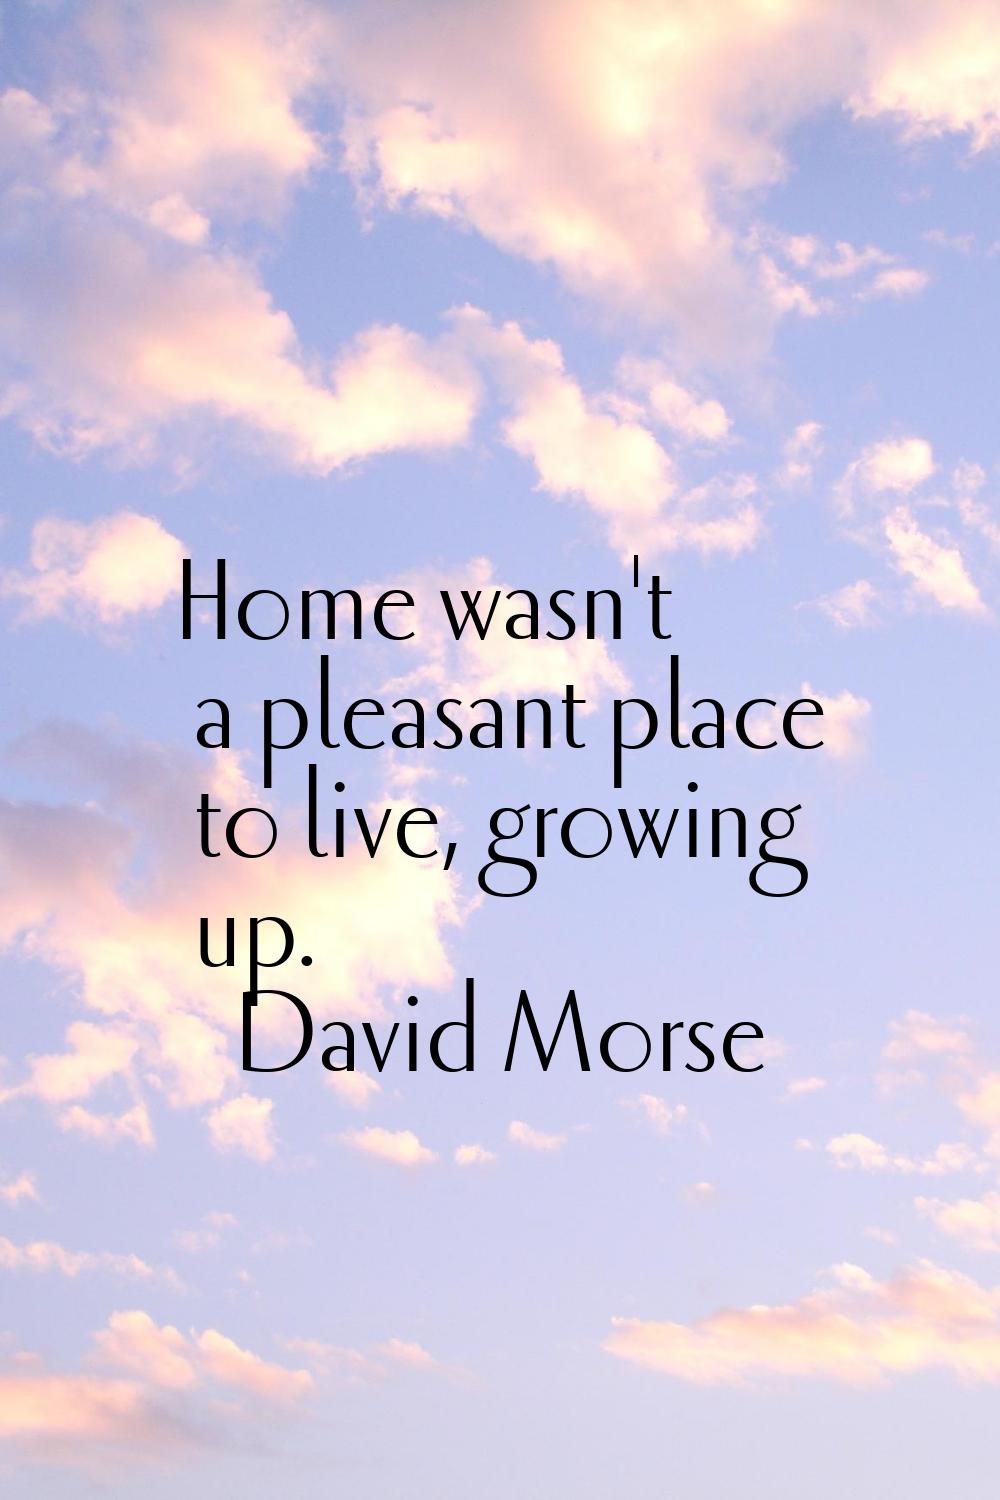 Home wasn't a pleasant place to live, growing up.